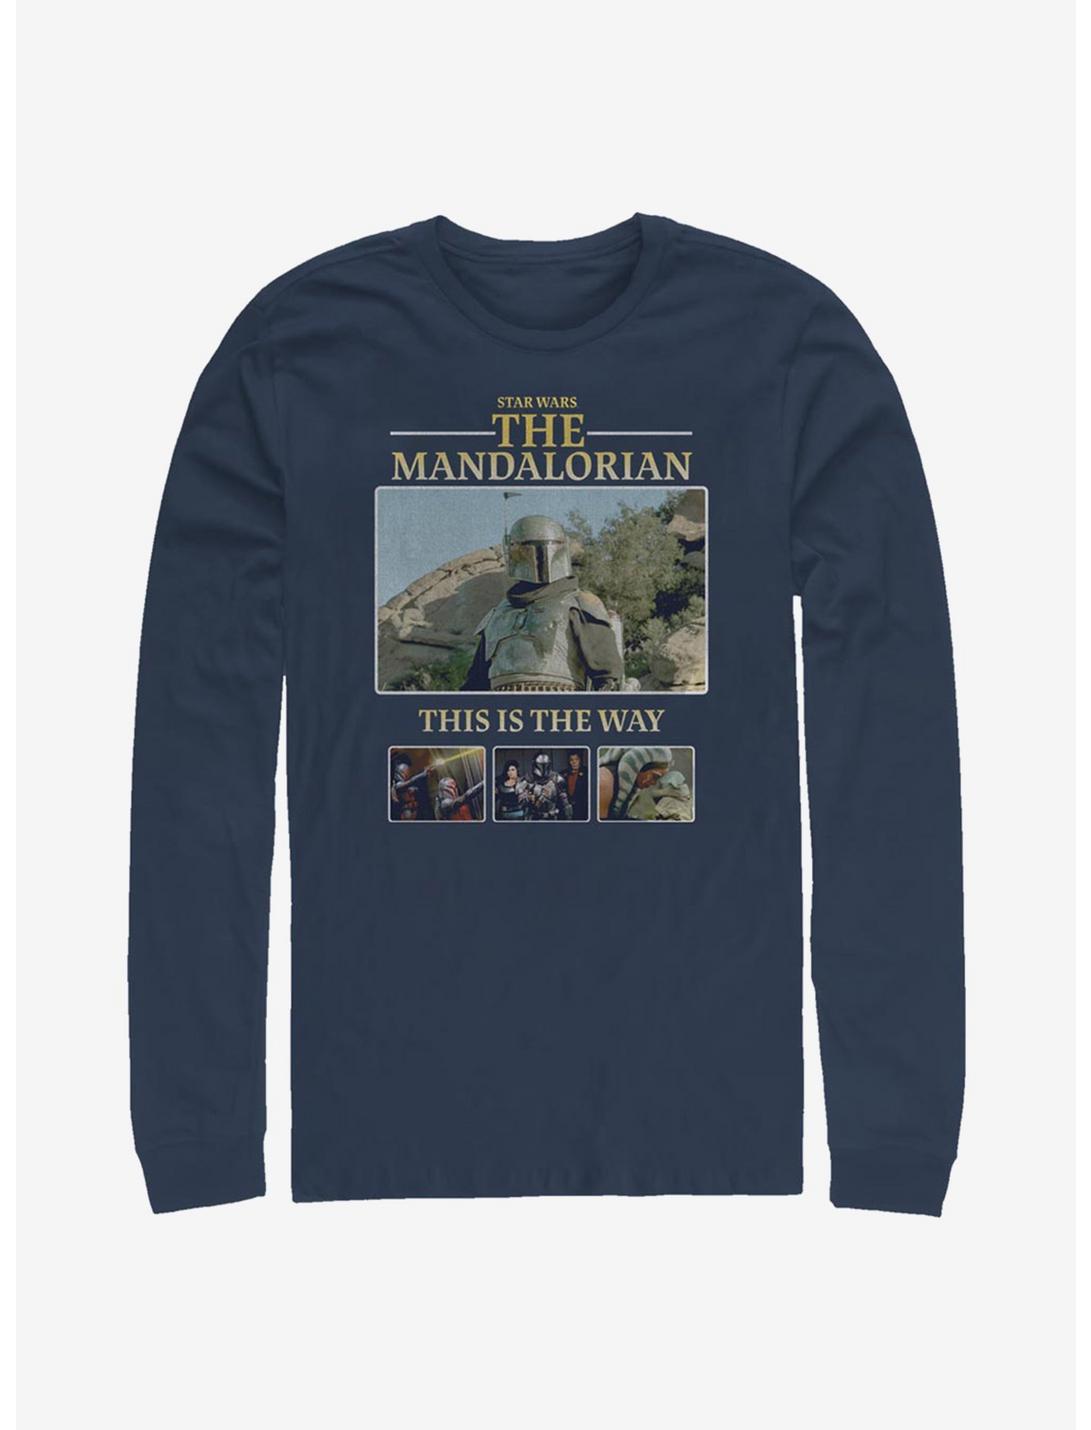 Star Wars The Mandalorian This Is The Way Team Long-Sleeve T-Shirt, NAVY, hi-res